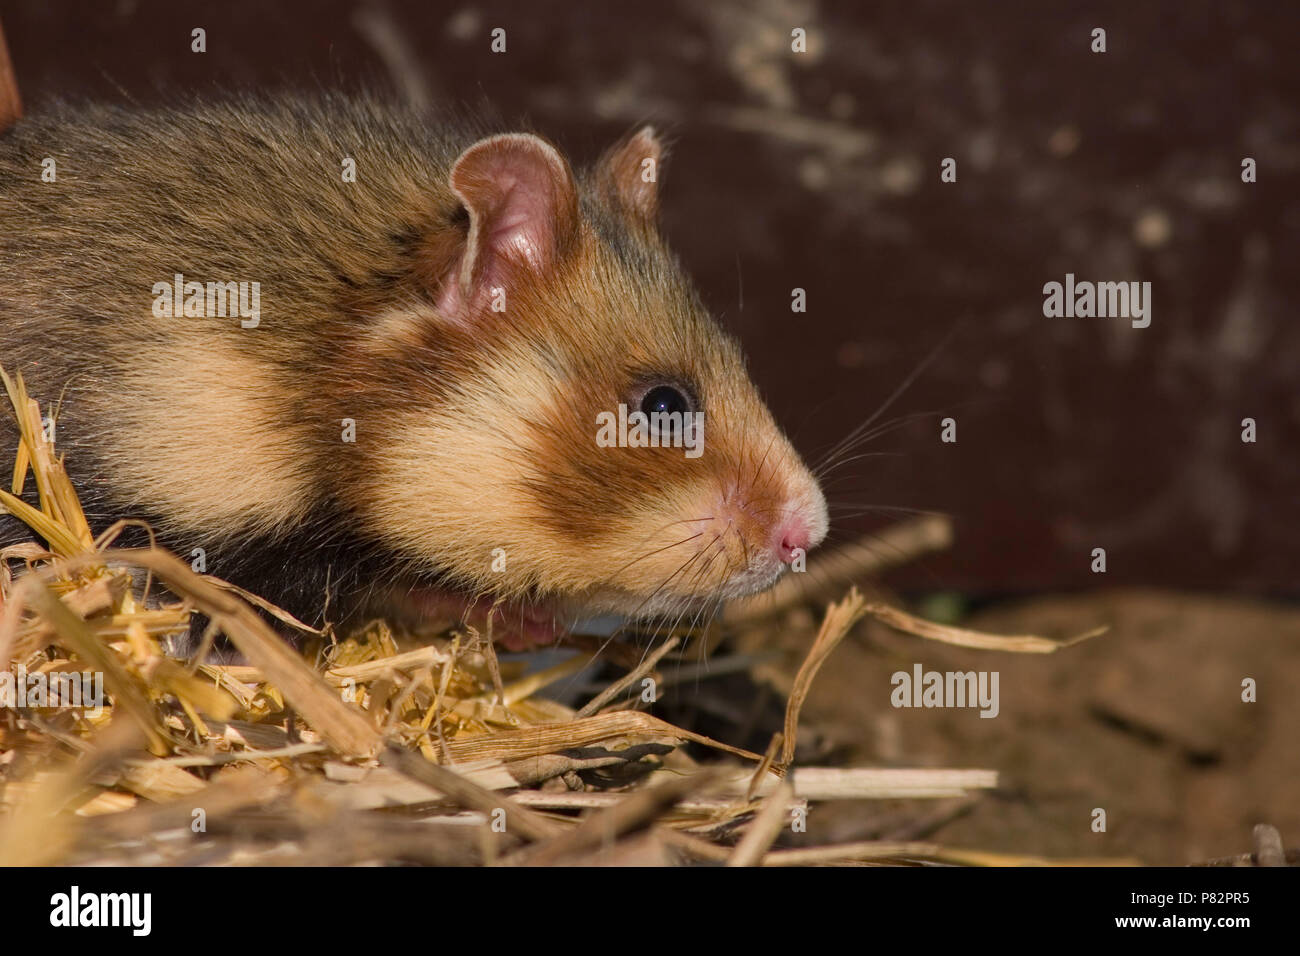 Europese Hamster close up; European Hamster close up Stock Photo